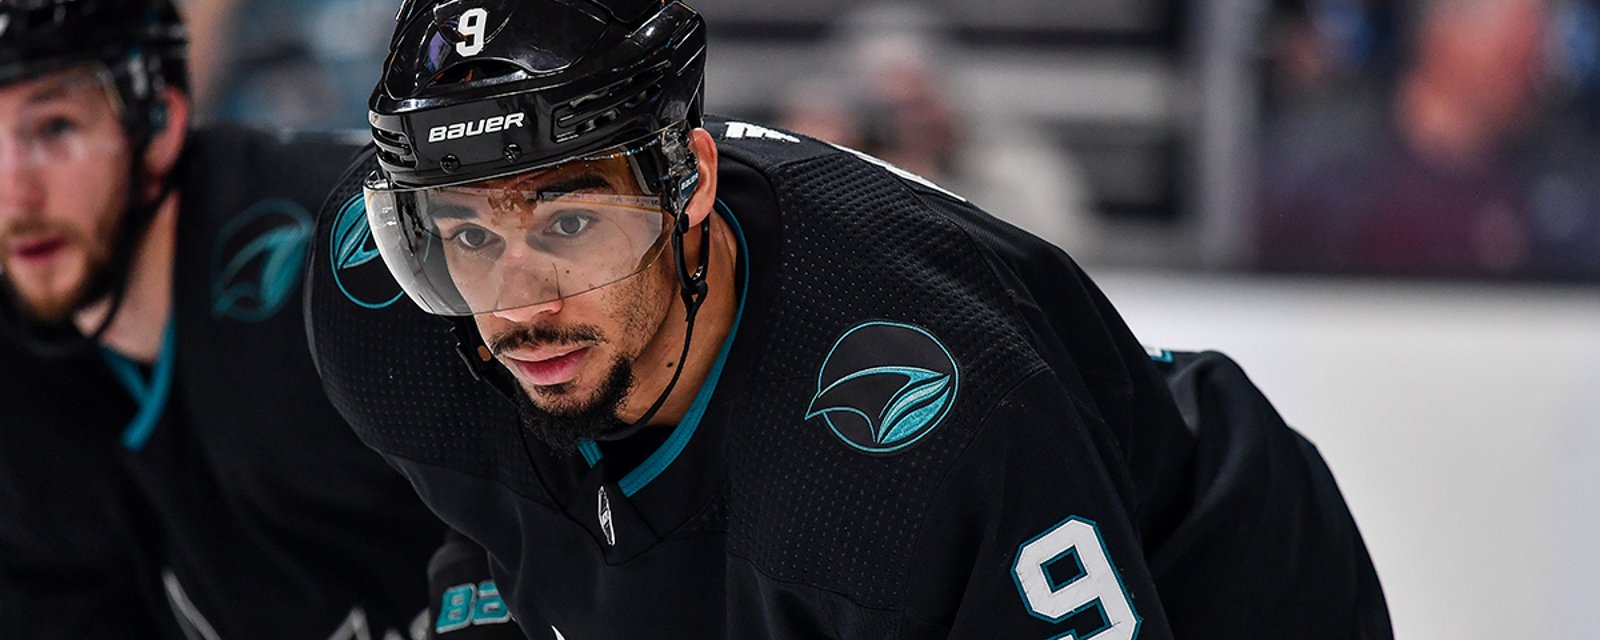 The hockey world rallies around Evander Kane after the loss of his unborn daughter